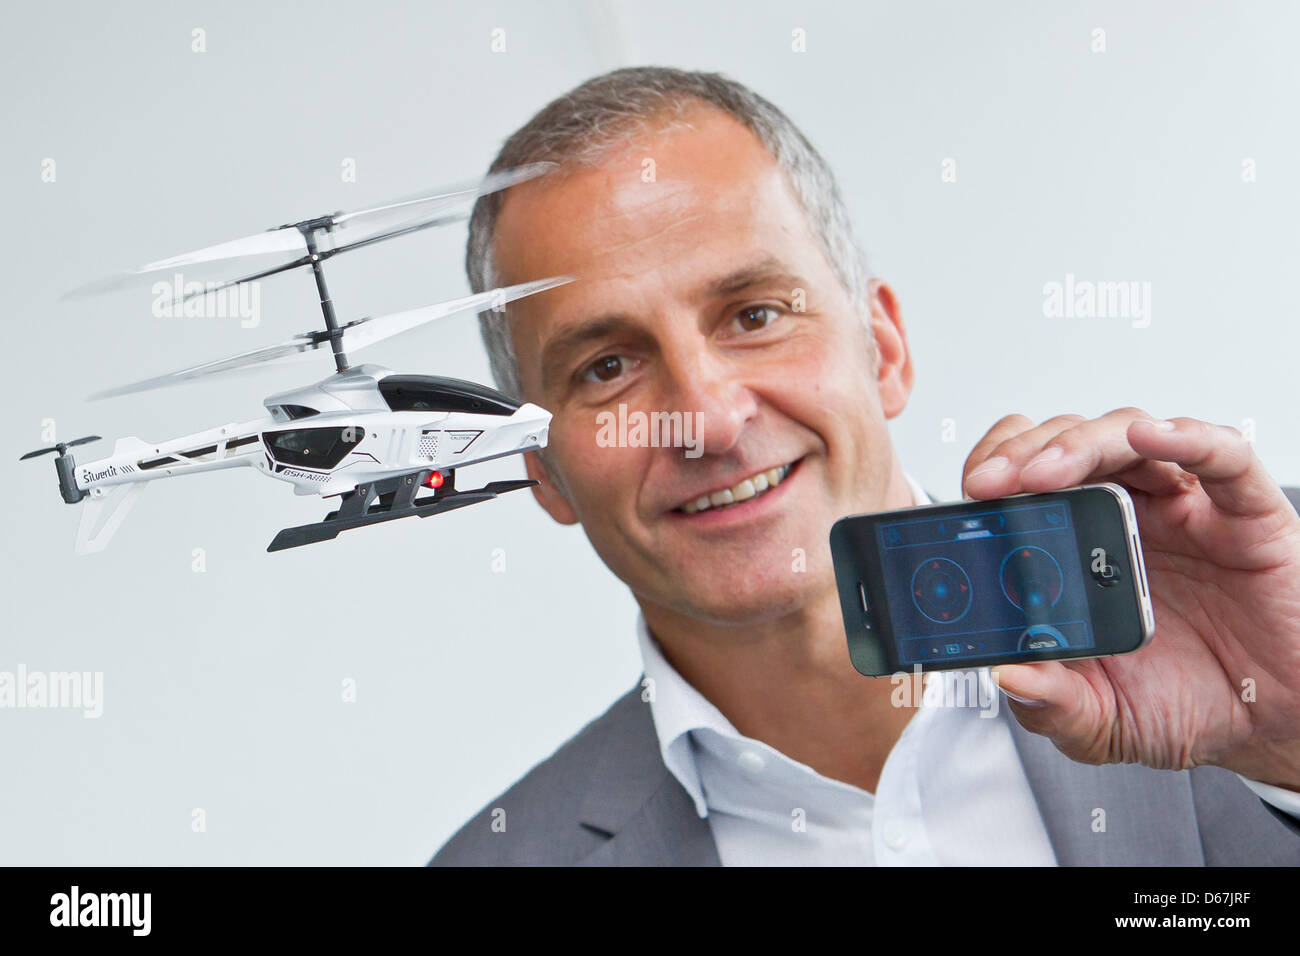 Stock Foto - The head of the Vedes AG, <b>Achim Weniger</b>, presents a toy ... - the-head-of-the-vedes-ag-achim-weniger-presents-a-toy-helicopter-by-D67JRF